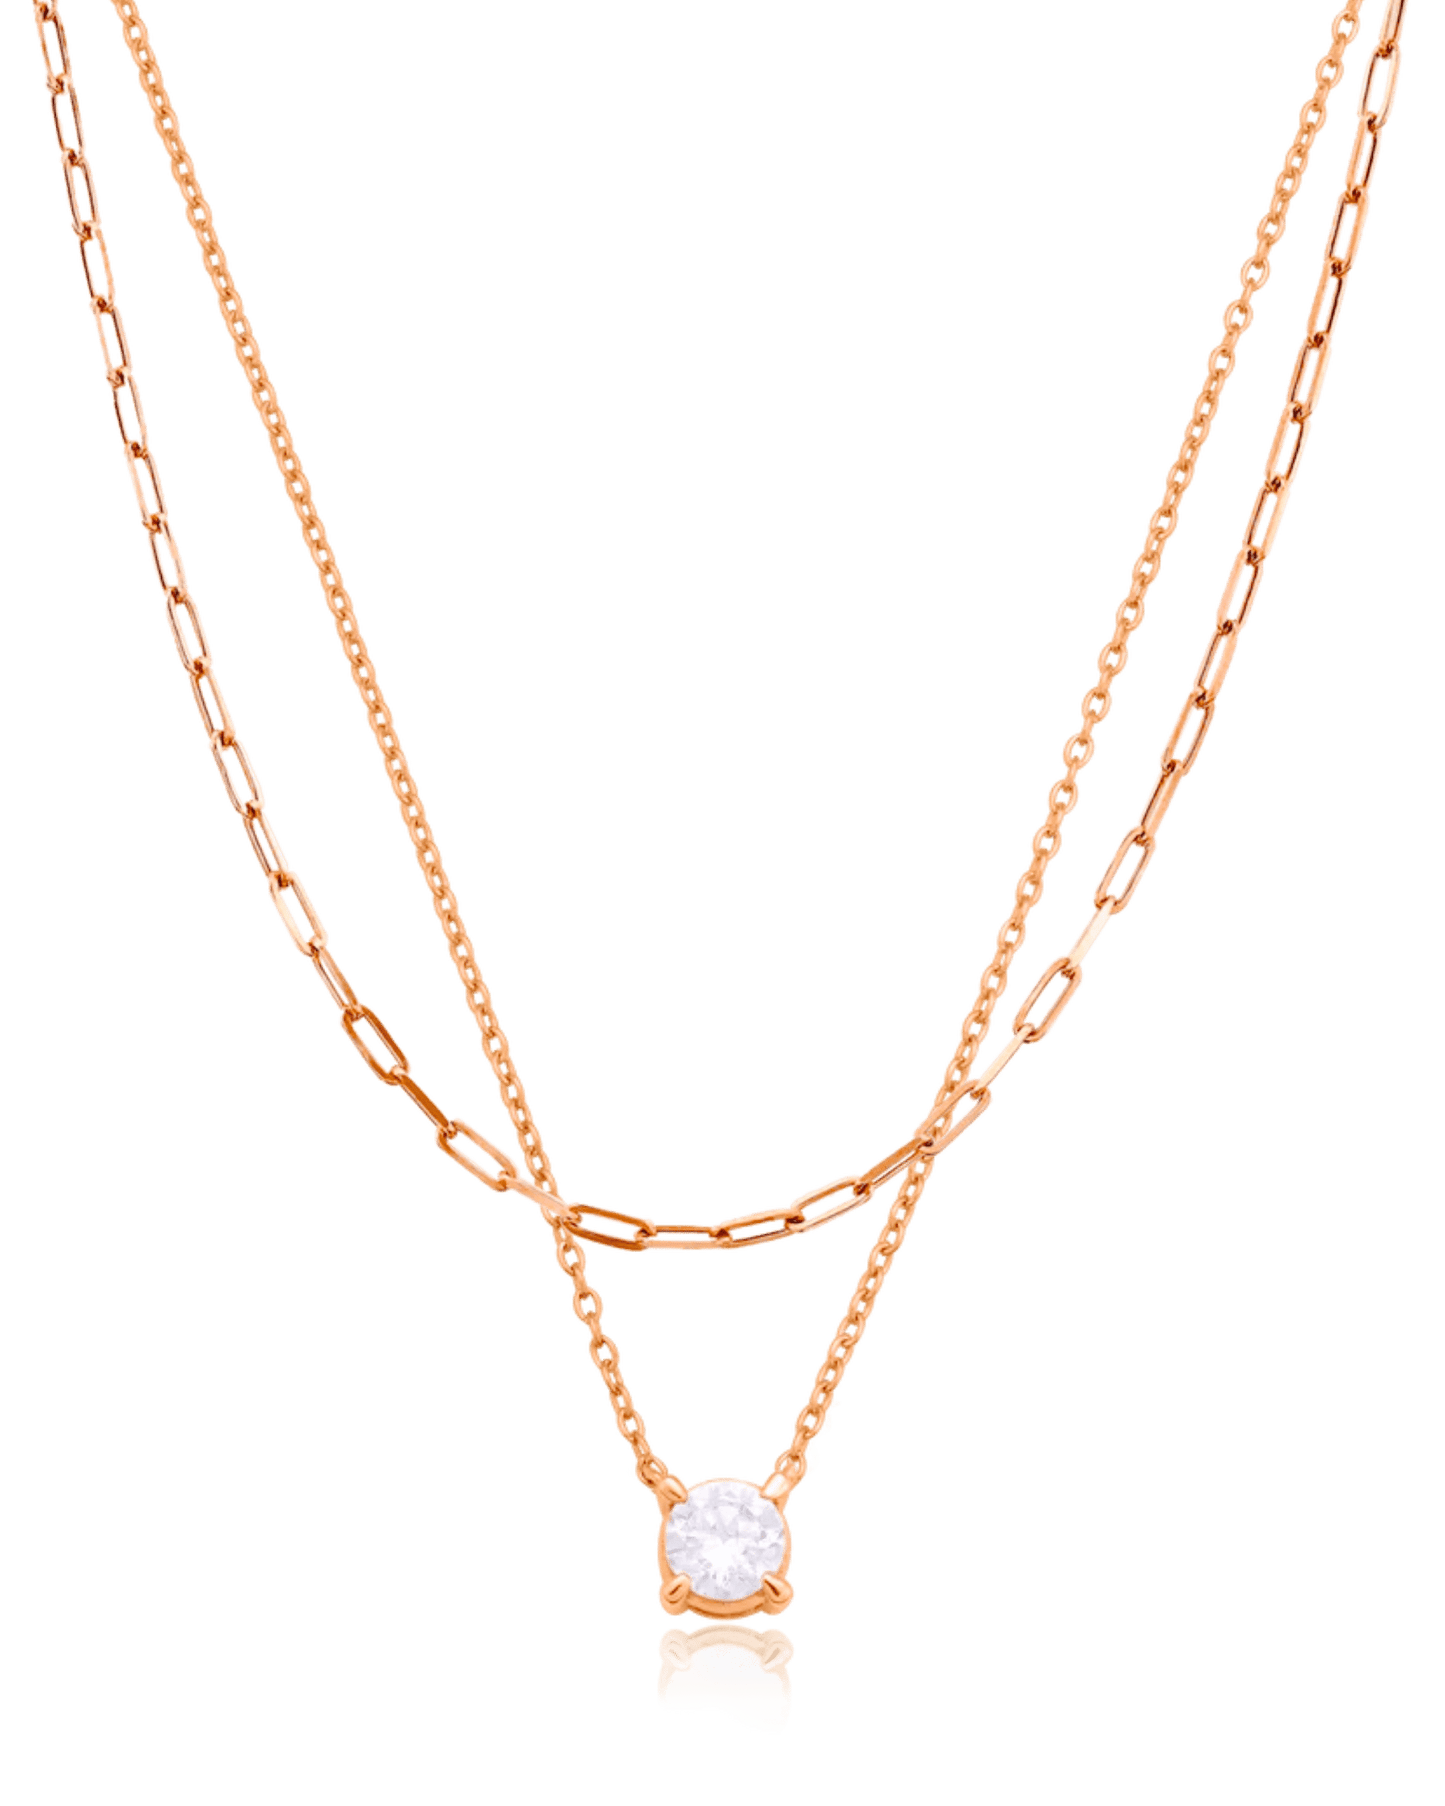 Set of Round Solitaire Diamond & Links Chain Necklaces - 925 Sterling Silver Necklaces magal-dev 